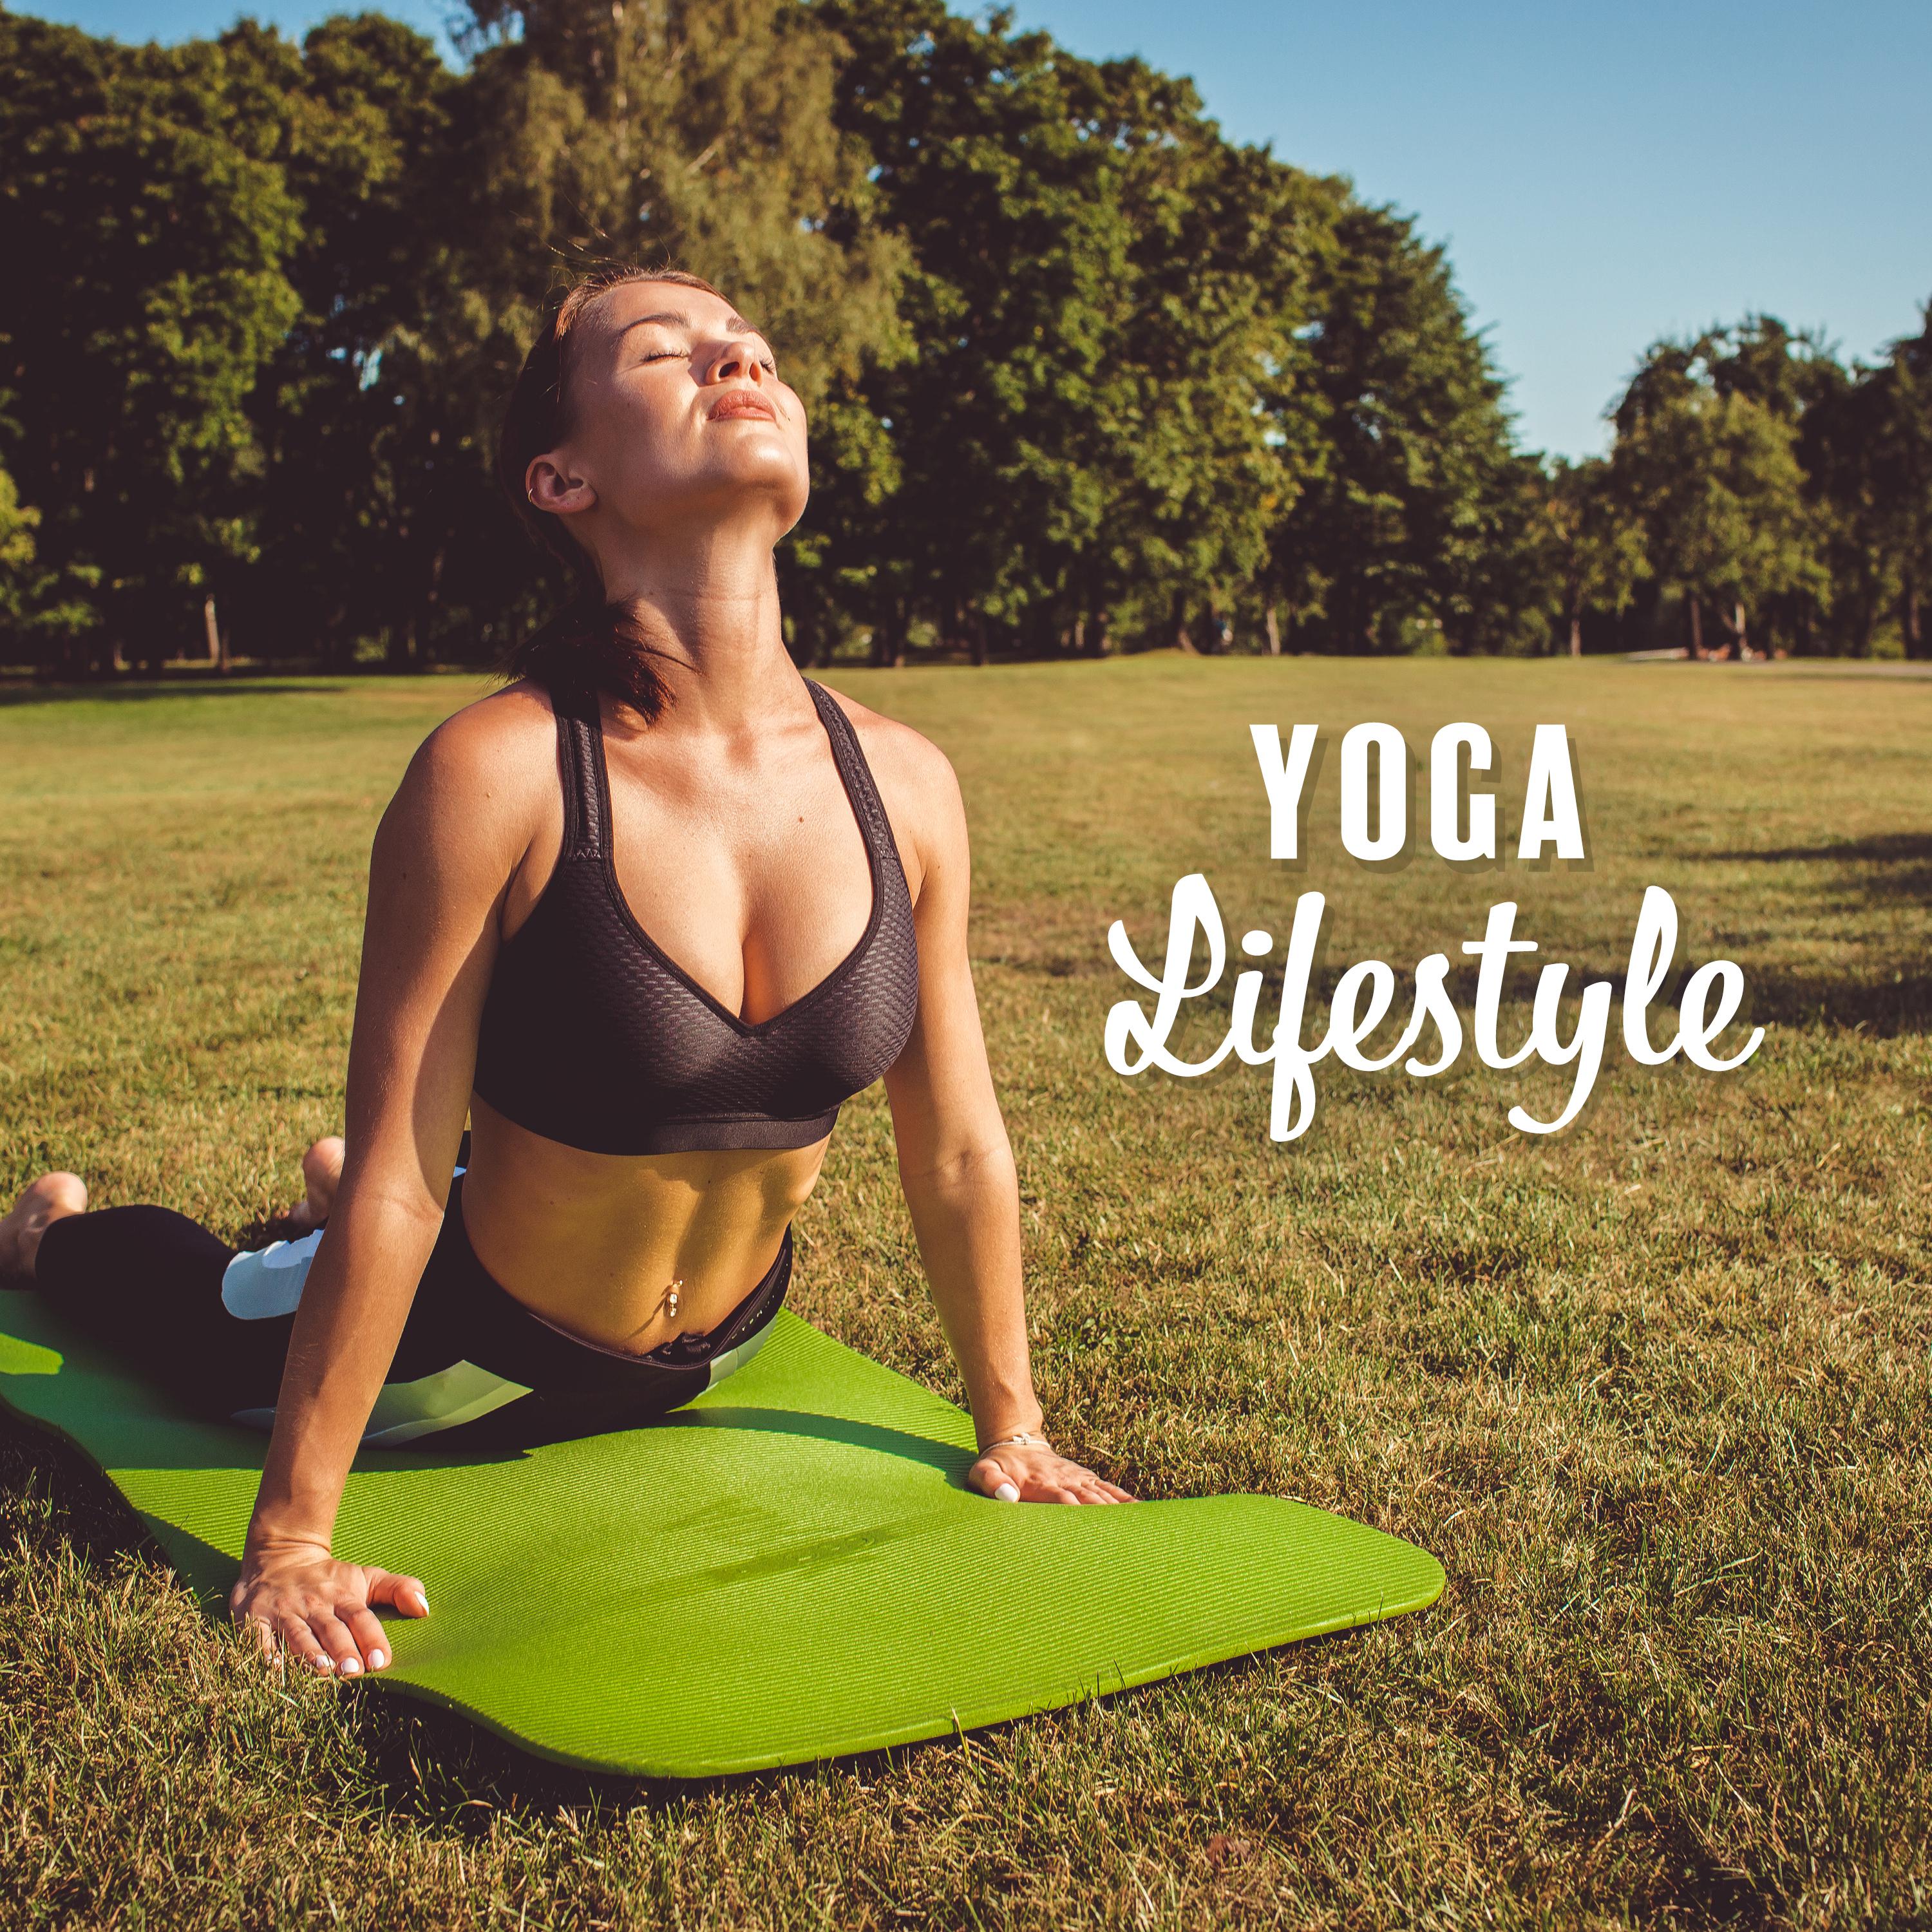 Yoga Lifestyle (Concentration & Mindfulness, Relax Zone, Music Collection for Meditation, Deep Breathing, Good Mood, Alleviate Stress, Awakening of Inner Strength, Silent Yoga)